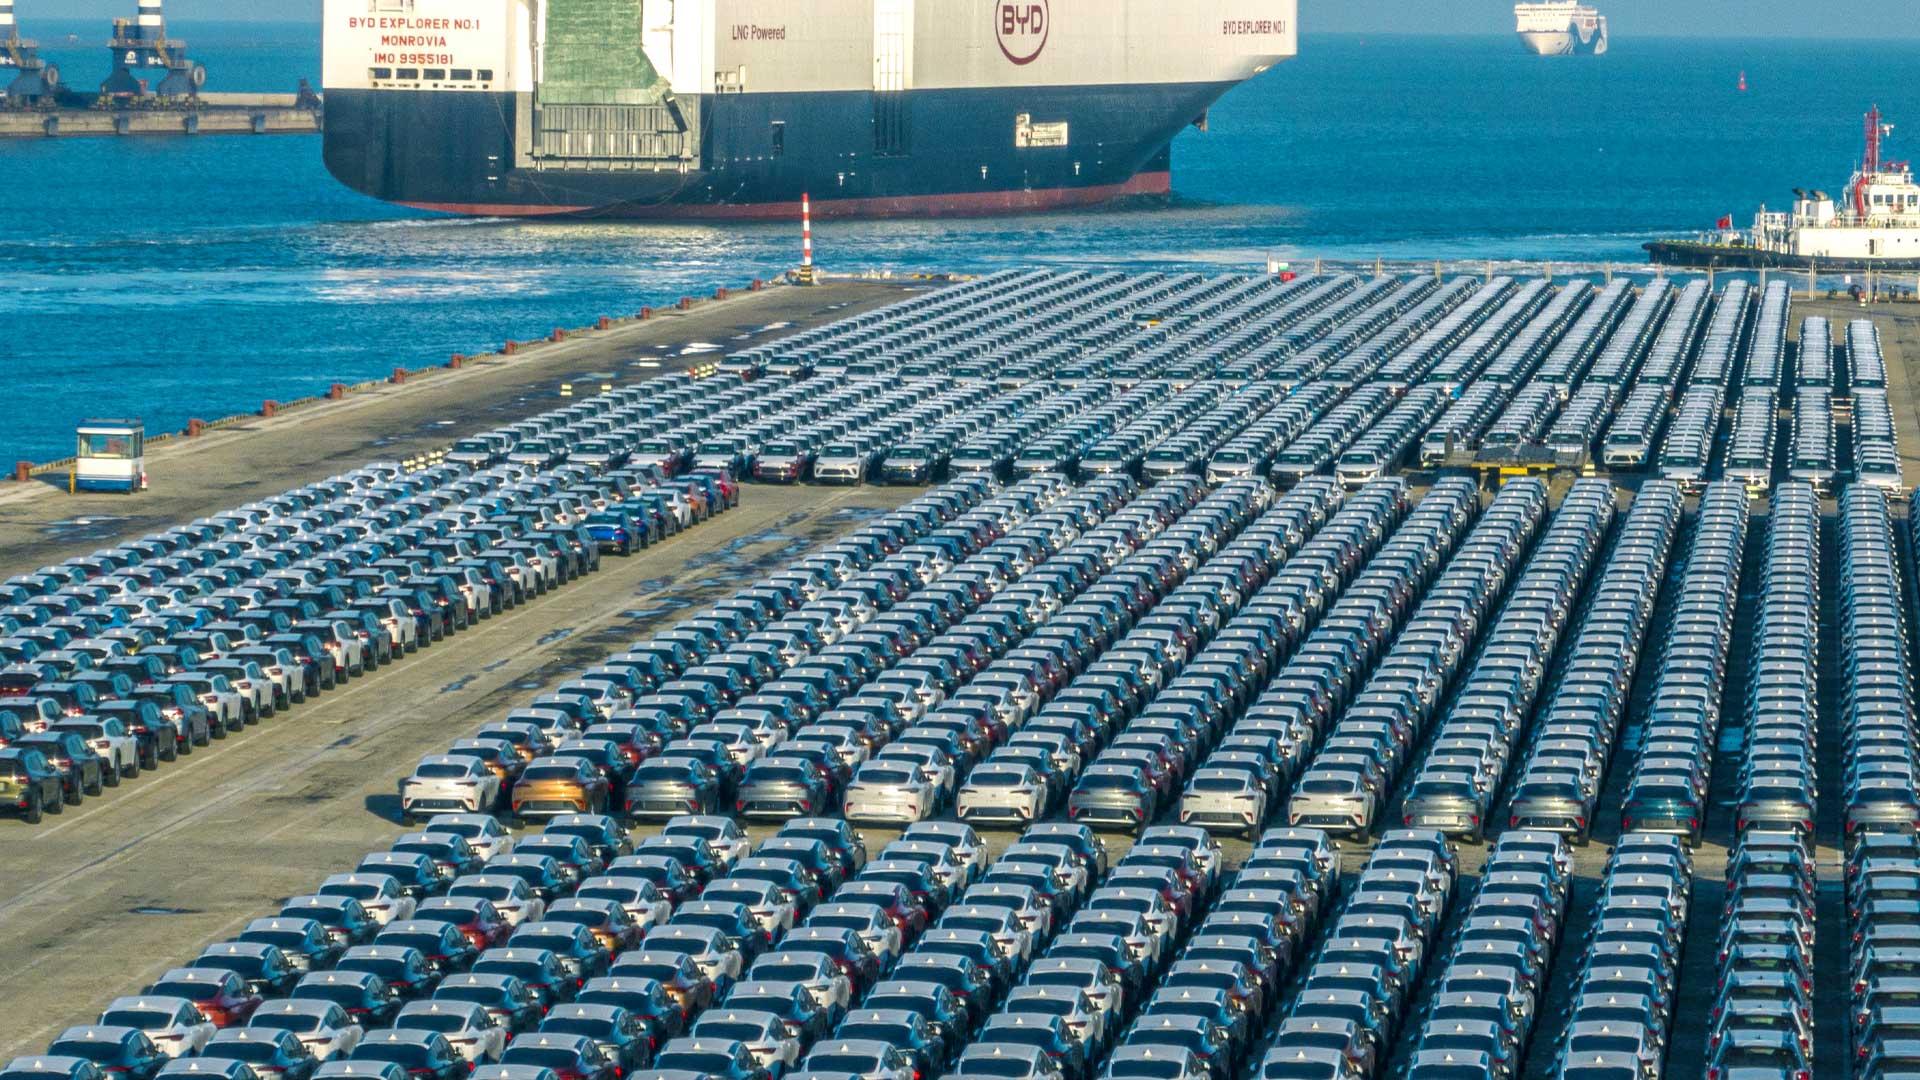 Ports in Europe are full of unsold Chinese electric vehicles